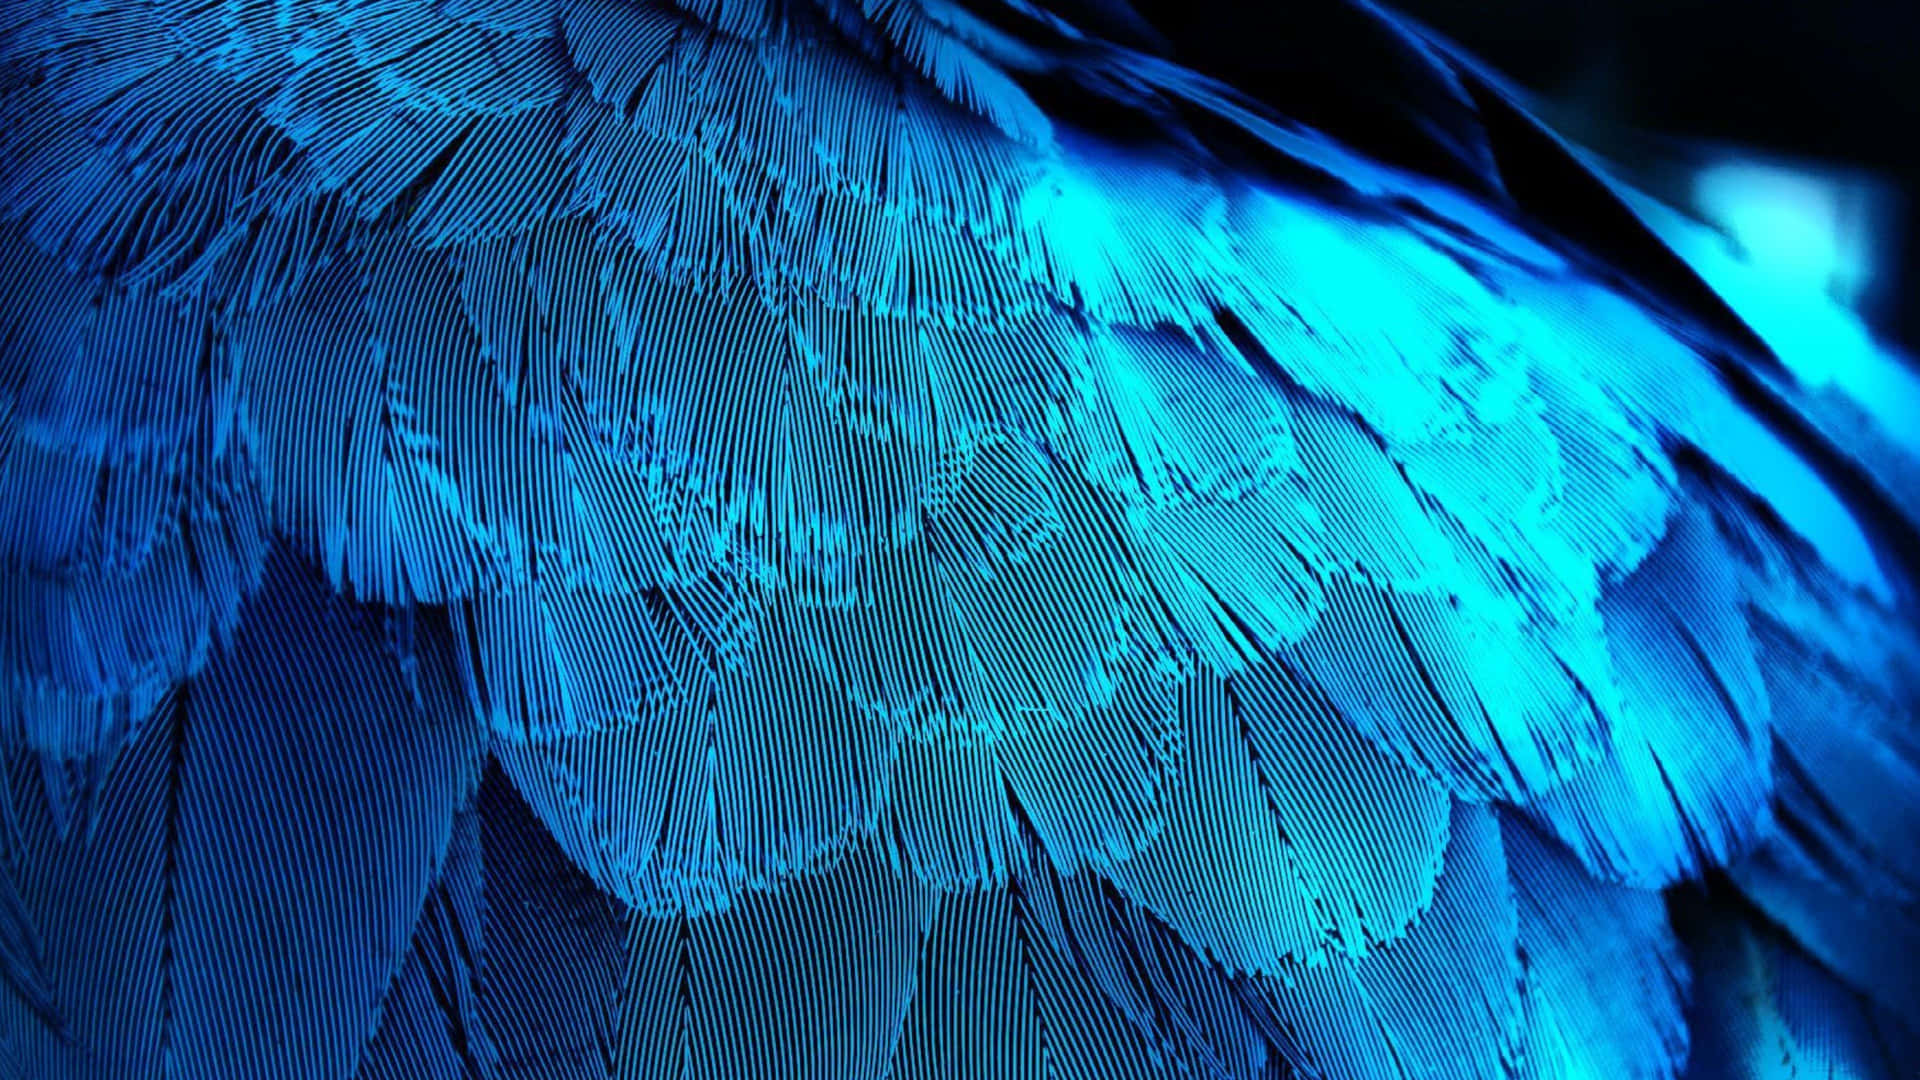 Download A Close Up Of A Blue Feather